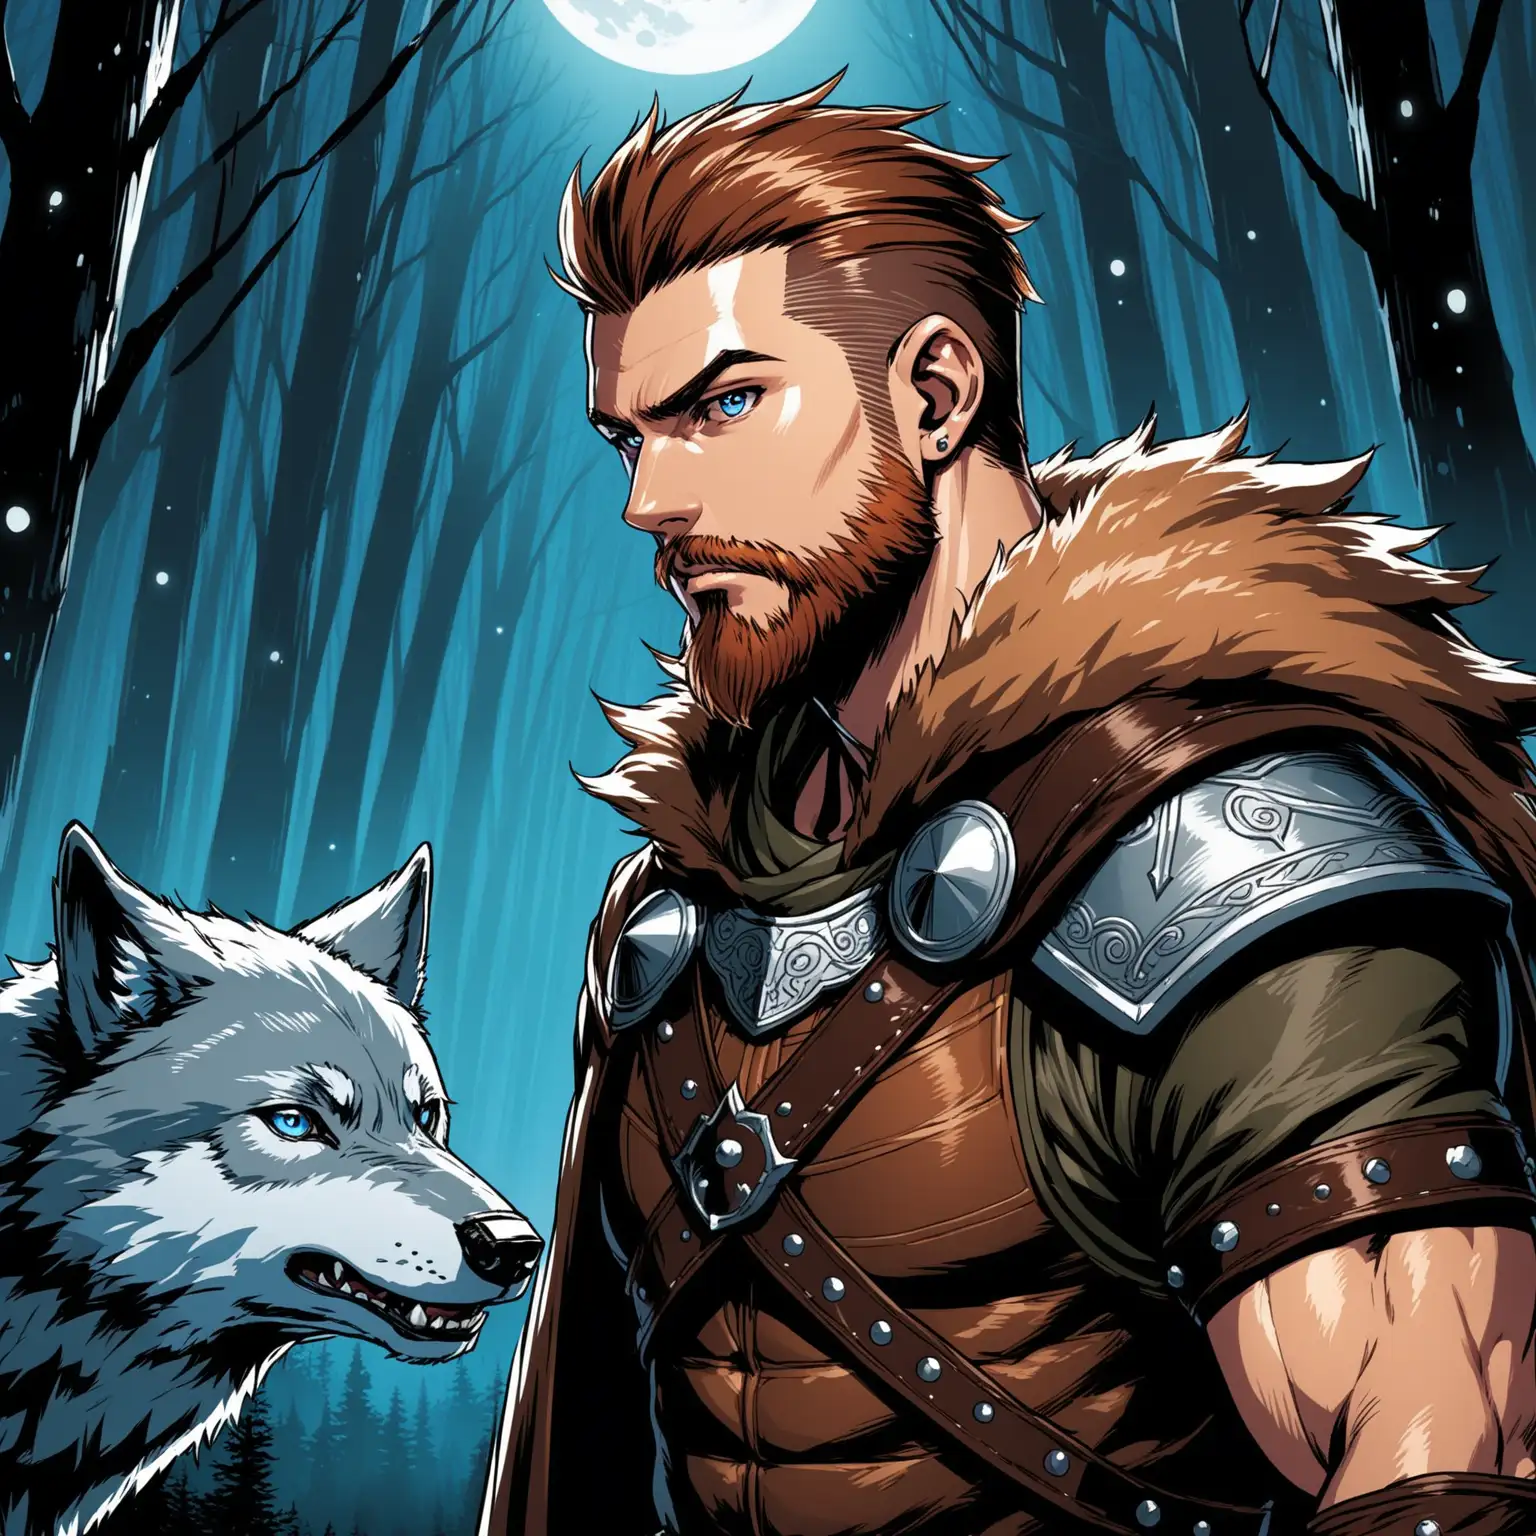 1 man. He is a fantasy ranger with a brown fur cloak over is brown and tan leather studded armor. He has reddish brown fauxhawk hair that is shaved on the sides and a short Viking beard. He is handsome and muscular. He is sneaking through a forest at night under moonlight. He has an serious expression. The hood of his cloak is up and covering his head but his face is shown. He is holding a longbow. He has a big gray wolf with blue eyes stalking next to him.